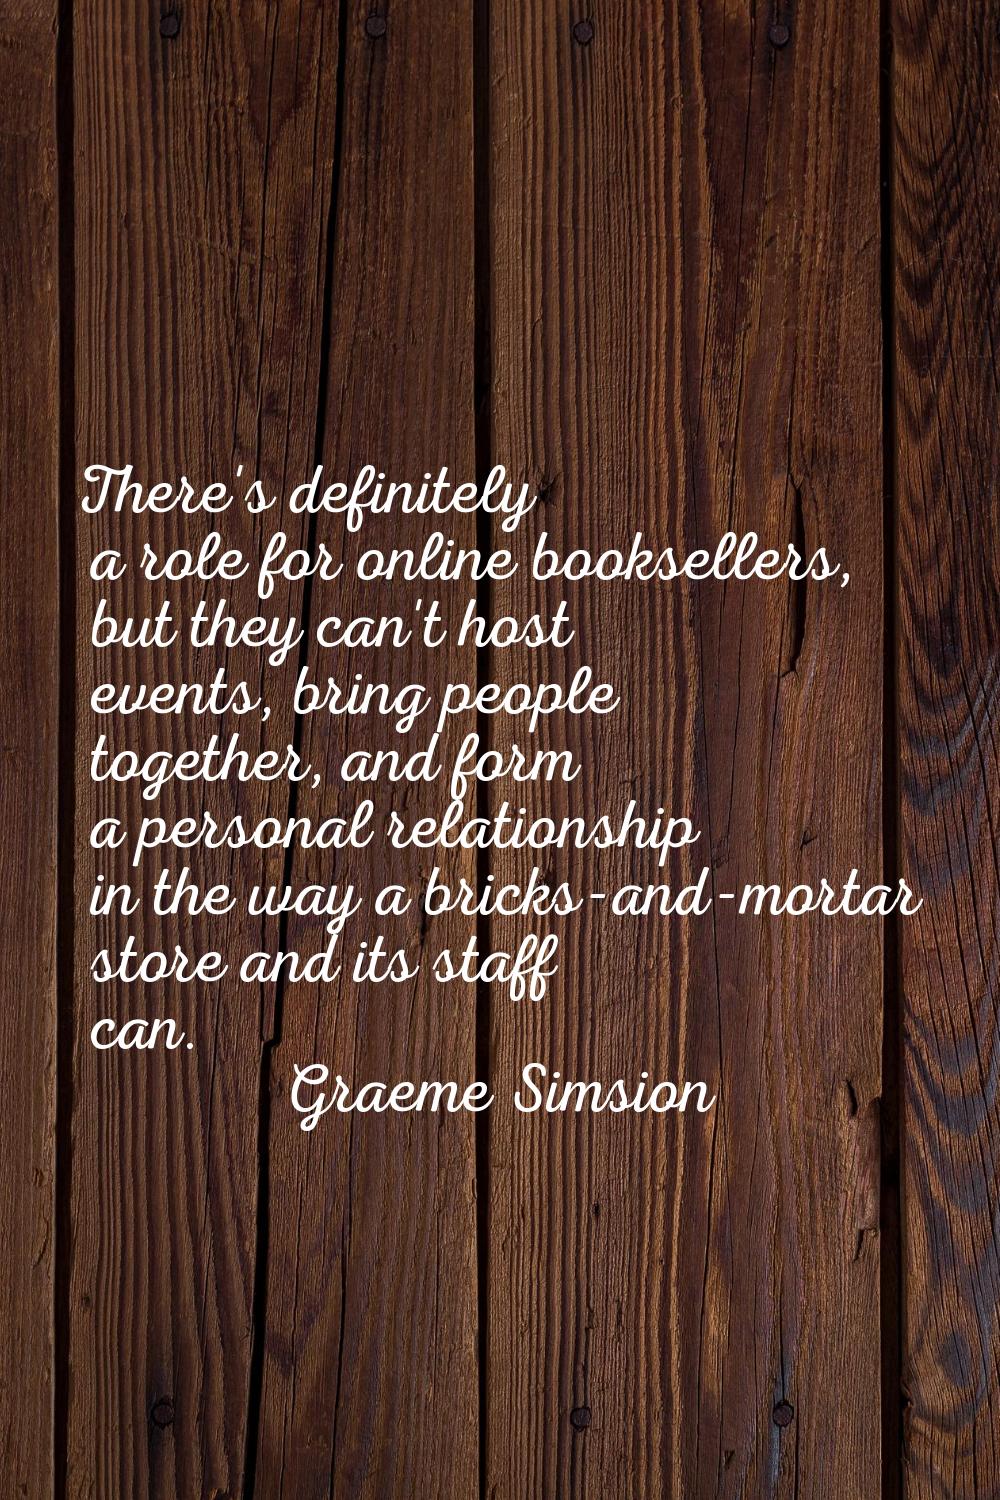 There's definitely a role for online booksellers, but they can't host events, bring people together